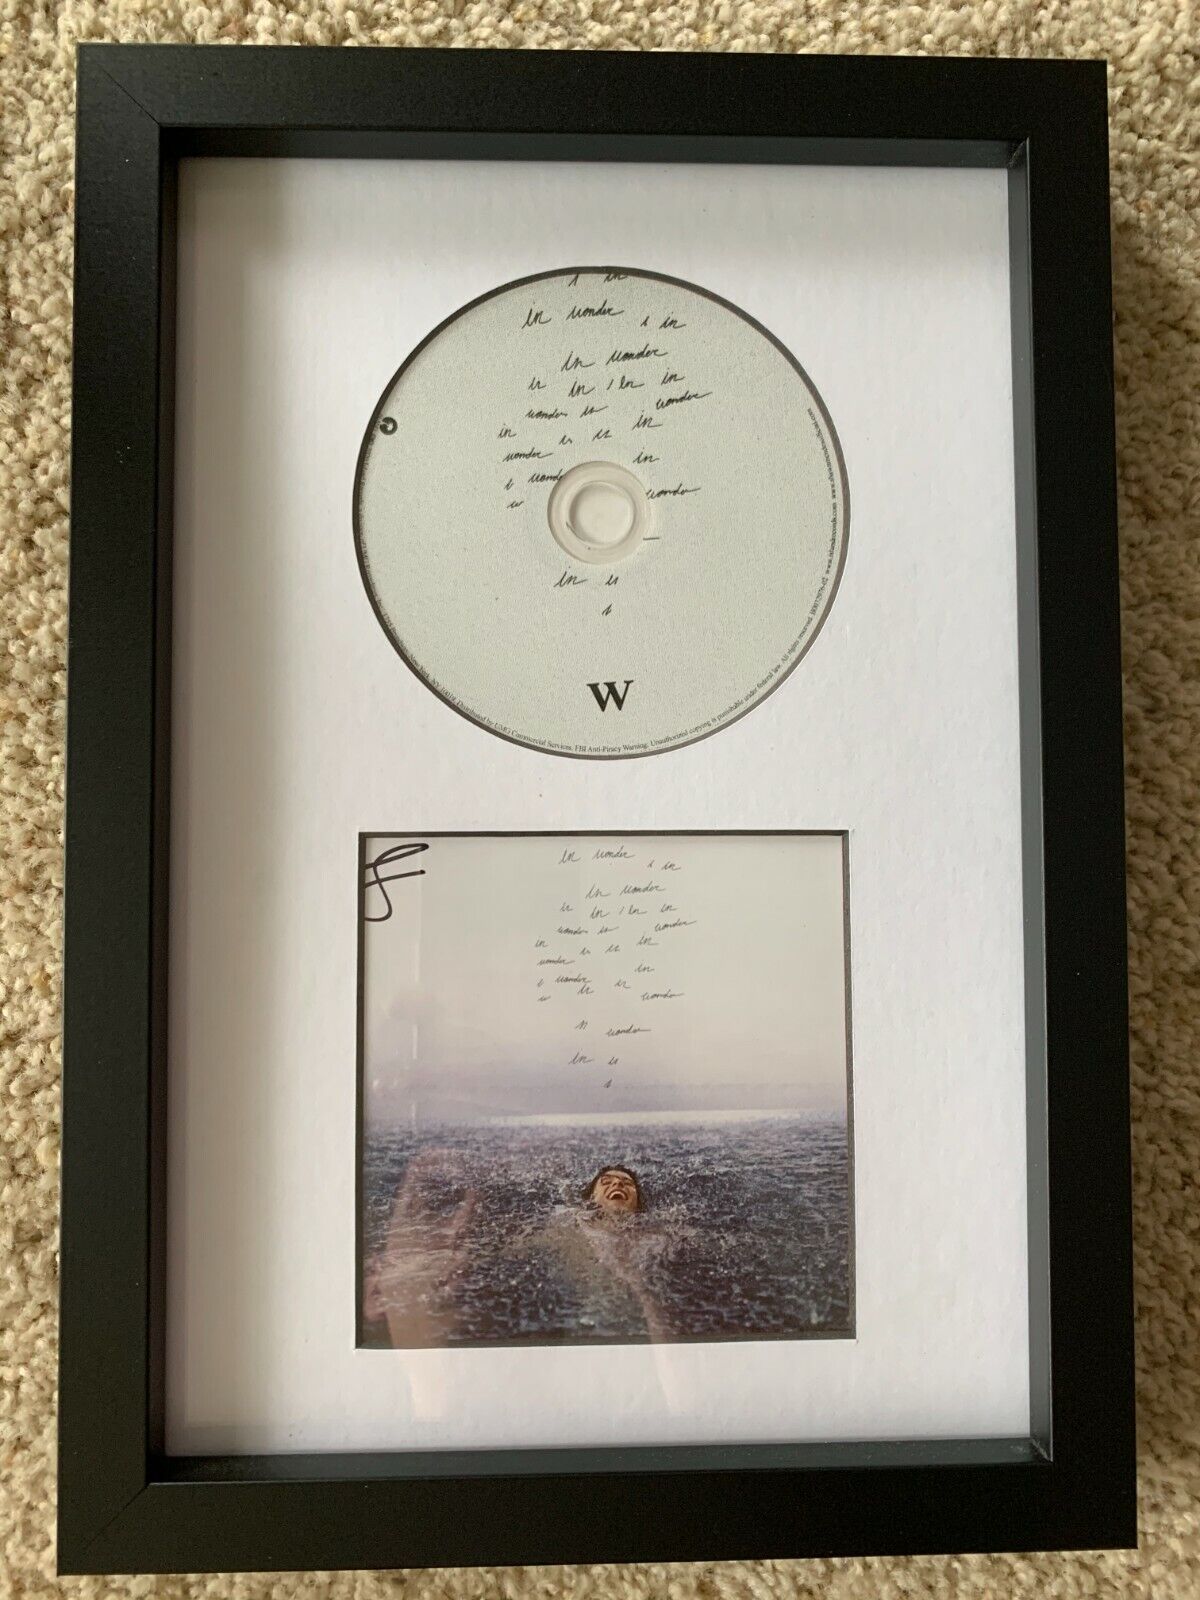 Shawn Mendes Signed Autographed Wonder CD Framed And Matted